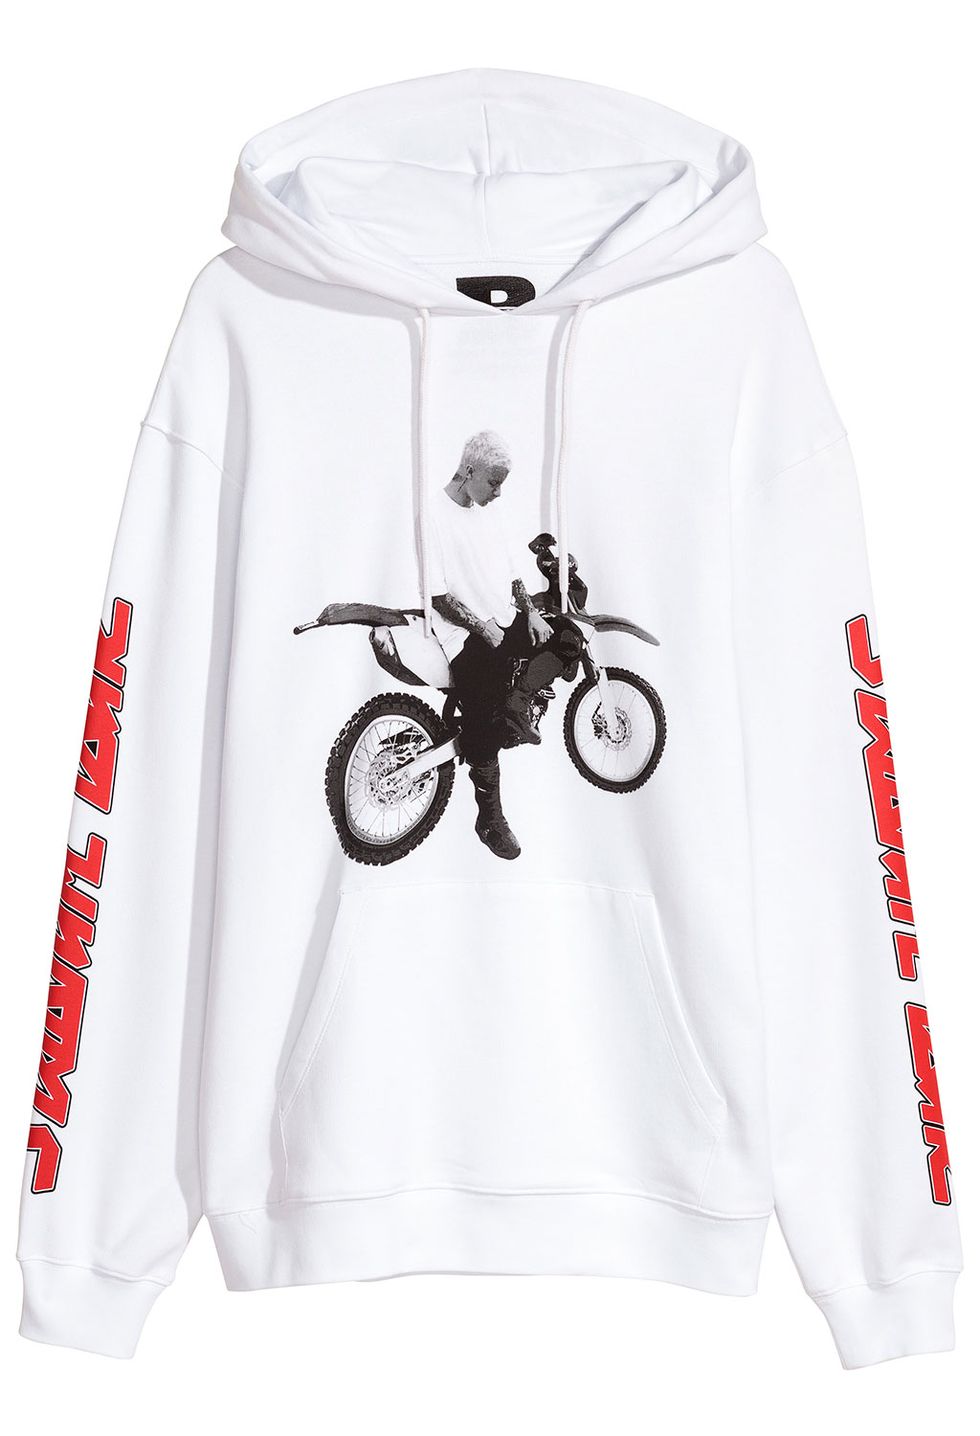 Product, Sleeve, Motorcycle, White, Carmine, Motorcycle accessories, Auto part, Clothes hanger, Graphics, Active shirt, 